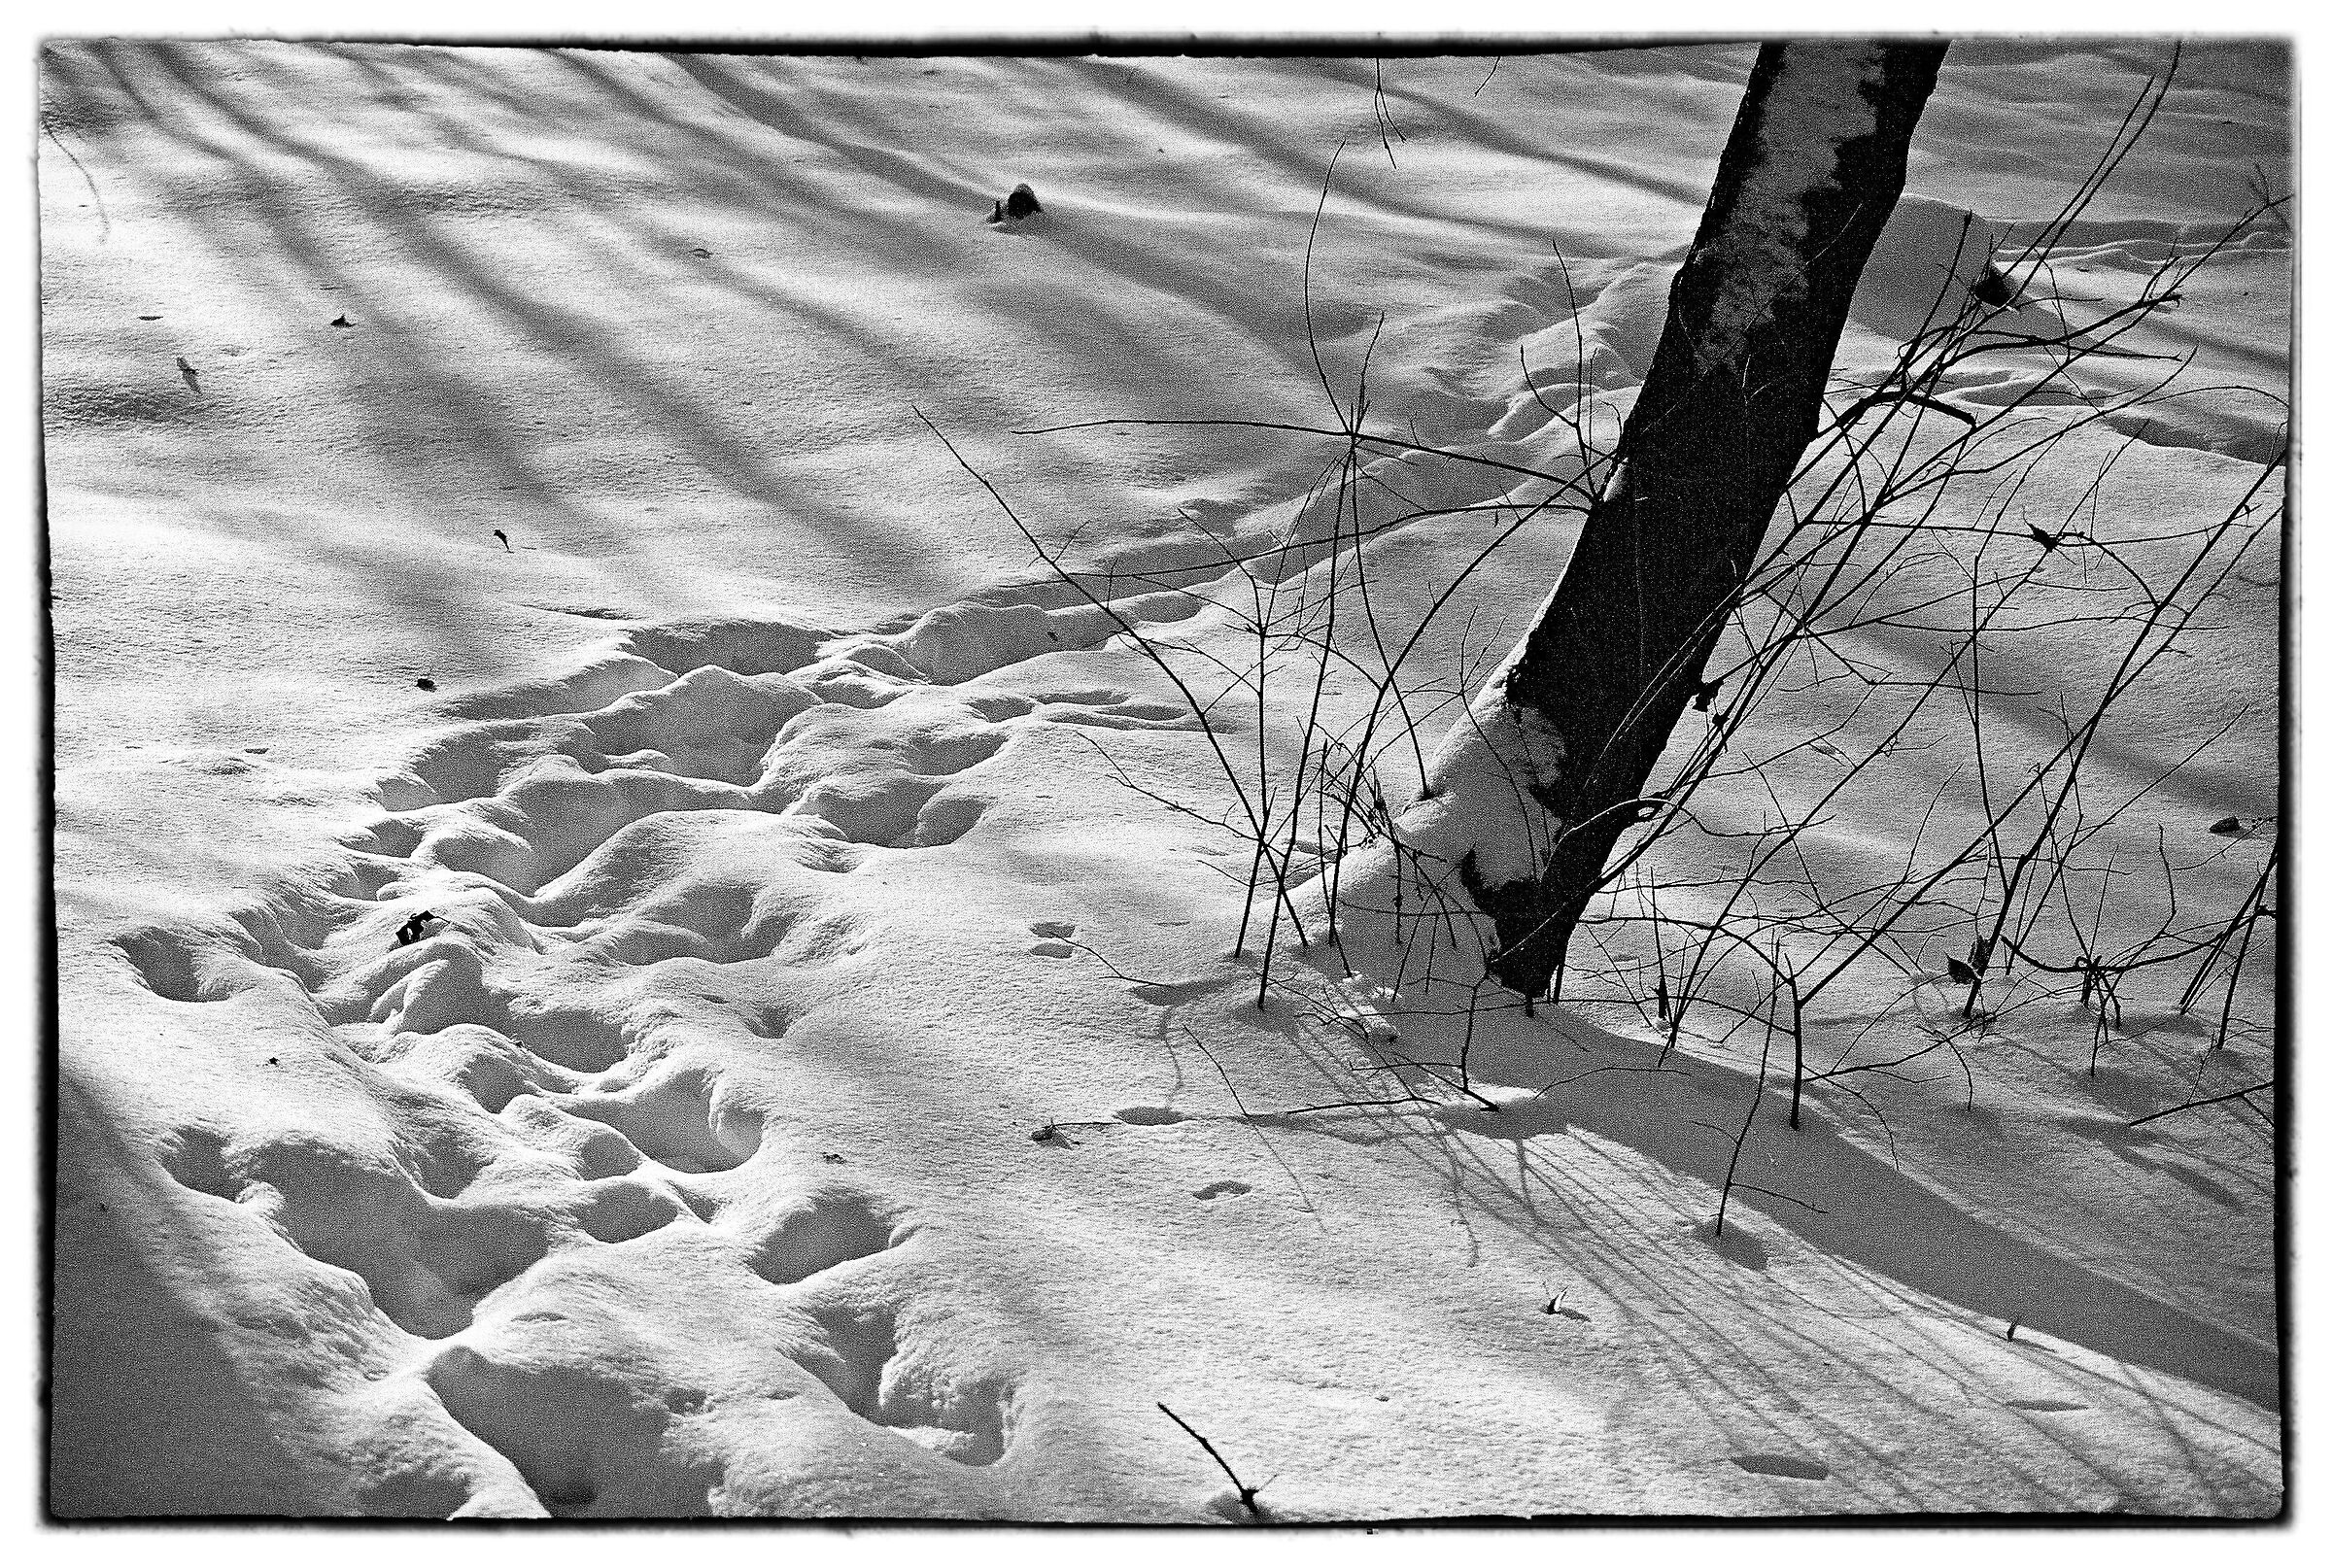 footprints in the snow - black and white...